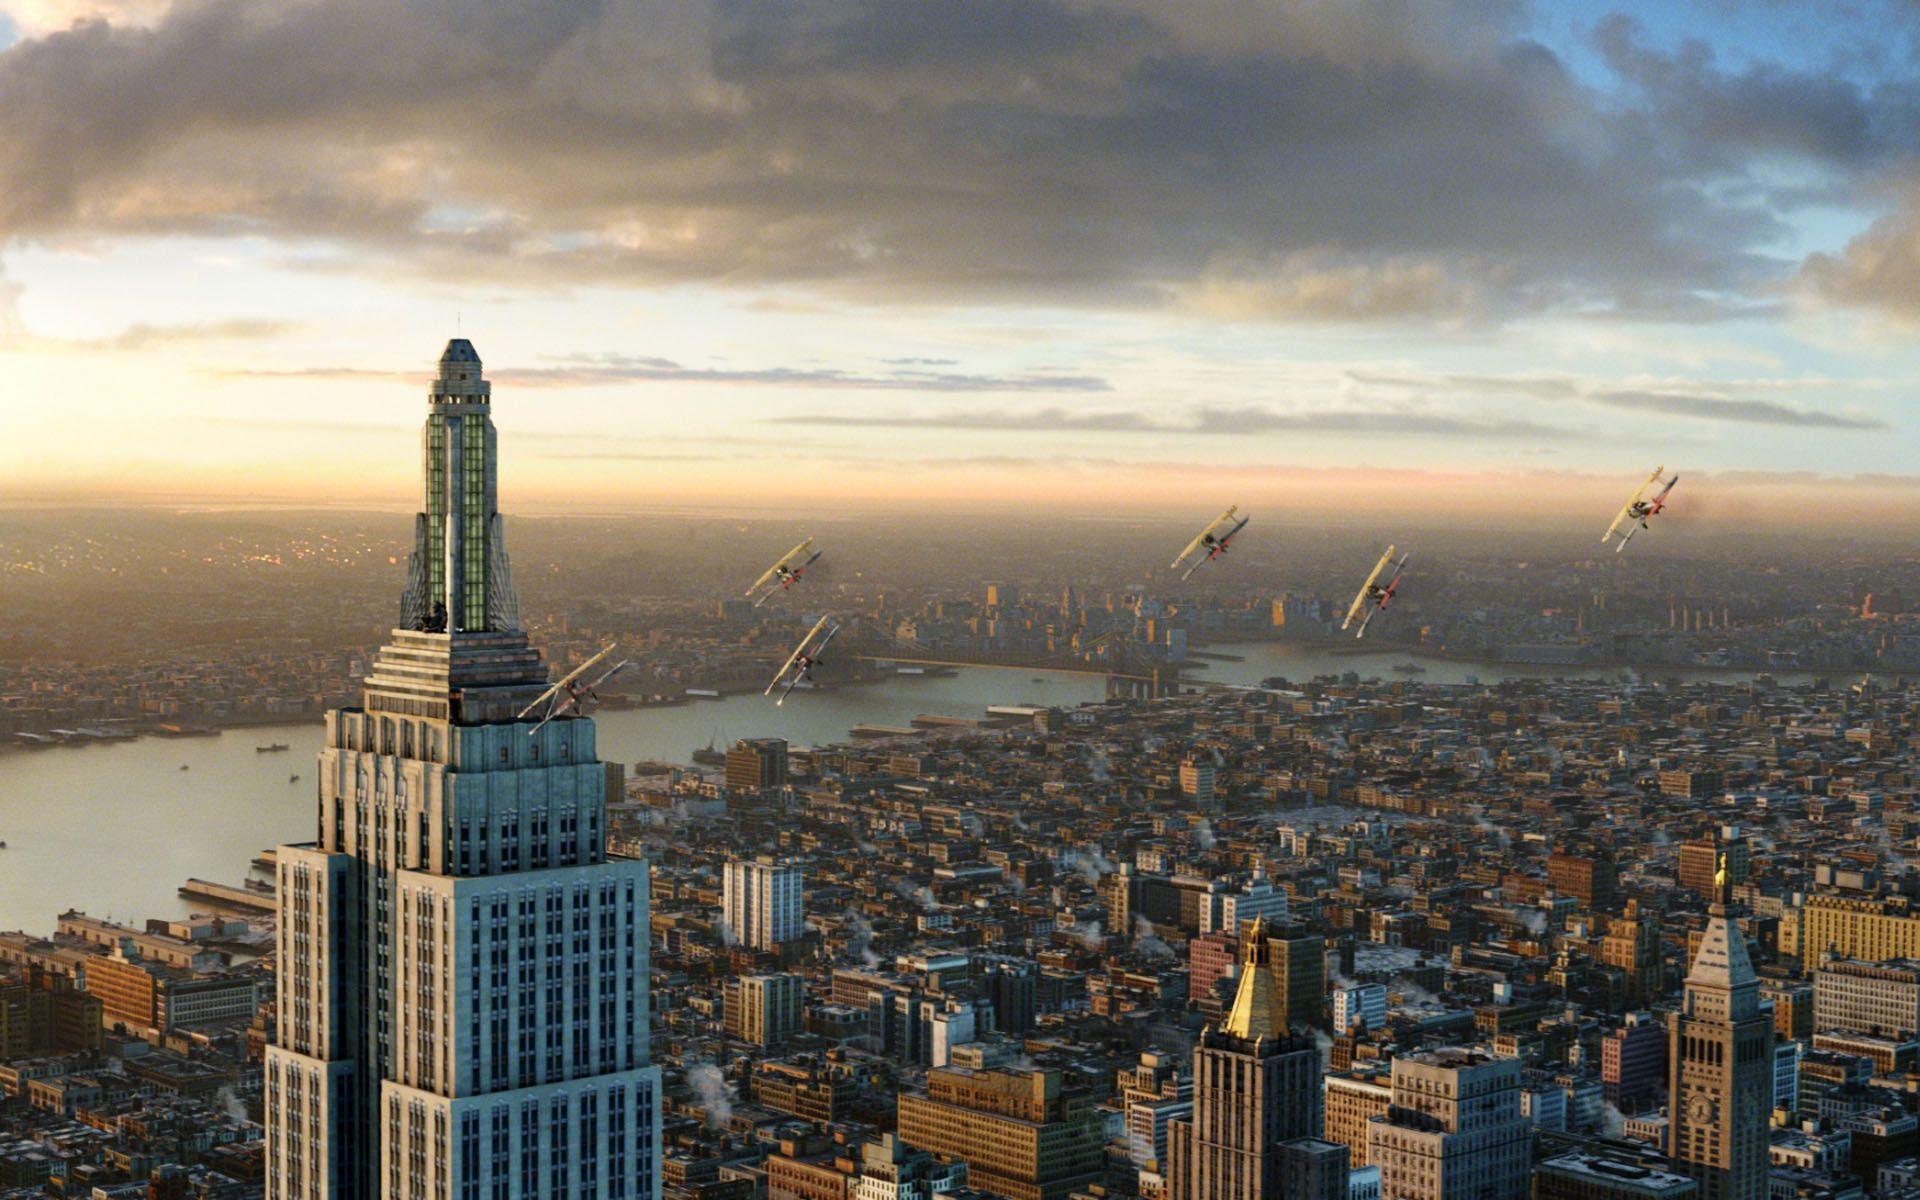 Empire State Building Wallpapers, 42 Free Modern Empire State